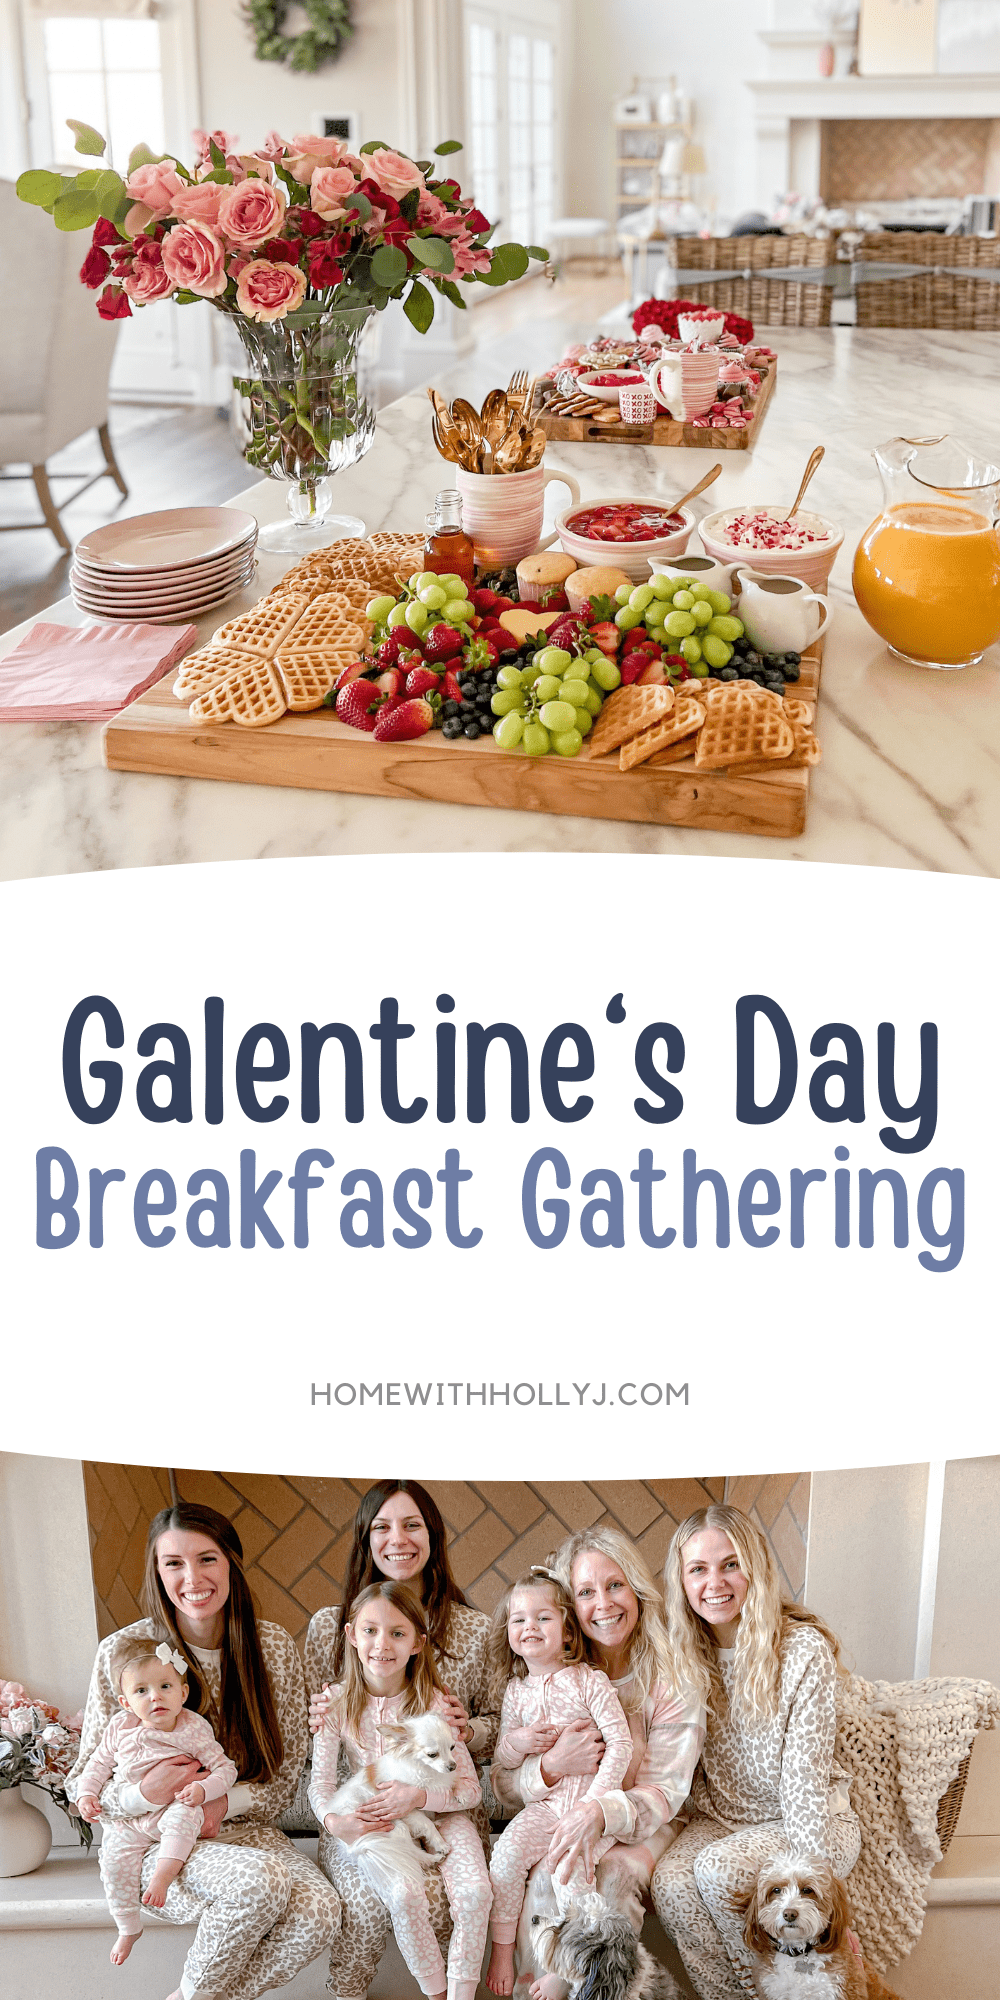 Make lasting memories with your family with a Galentine's Day breakfast gathering. Celebrate multiple generations with love, crafts, and treats.